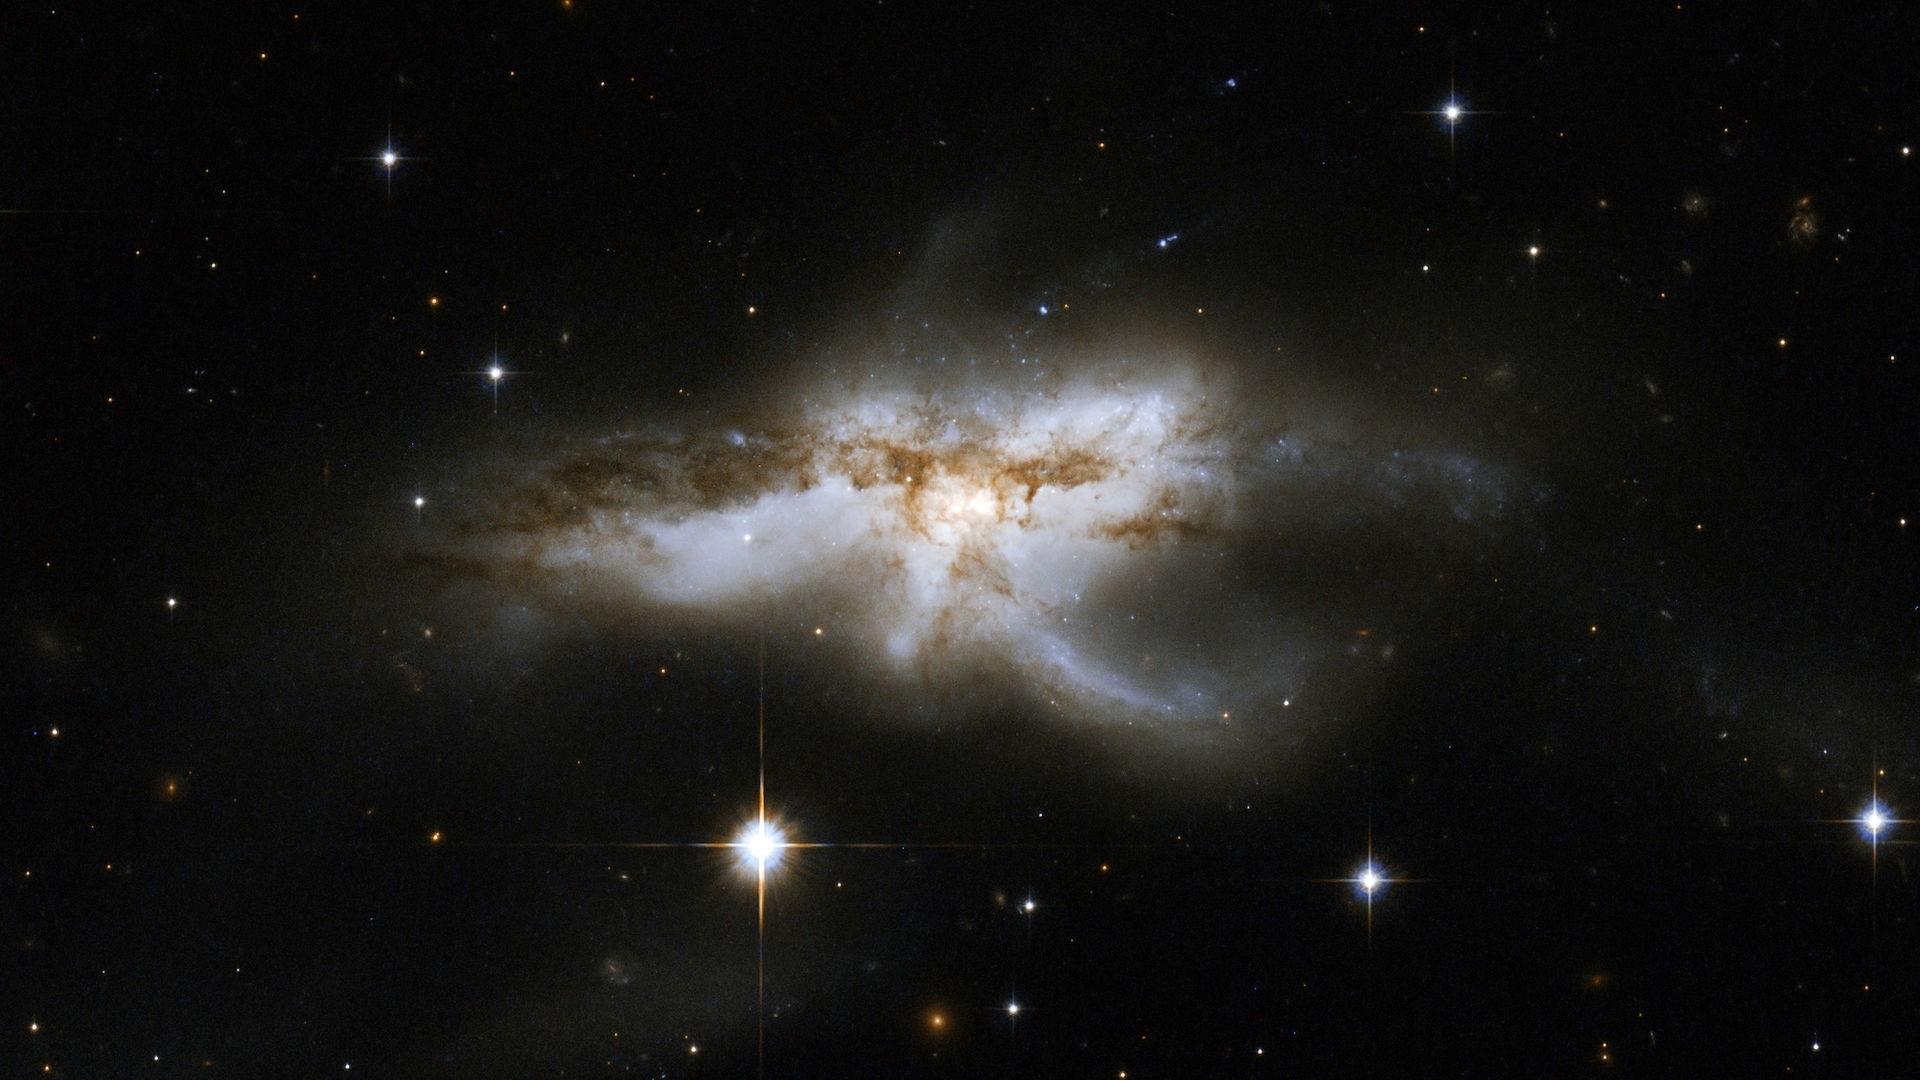 Image of galaxy known as NGC 6240